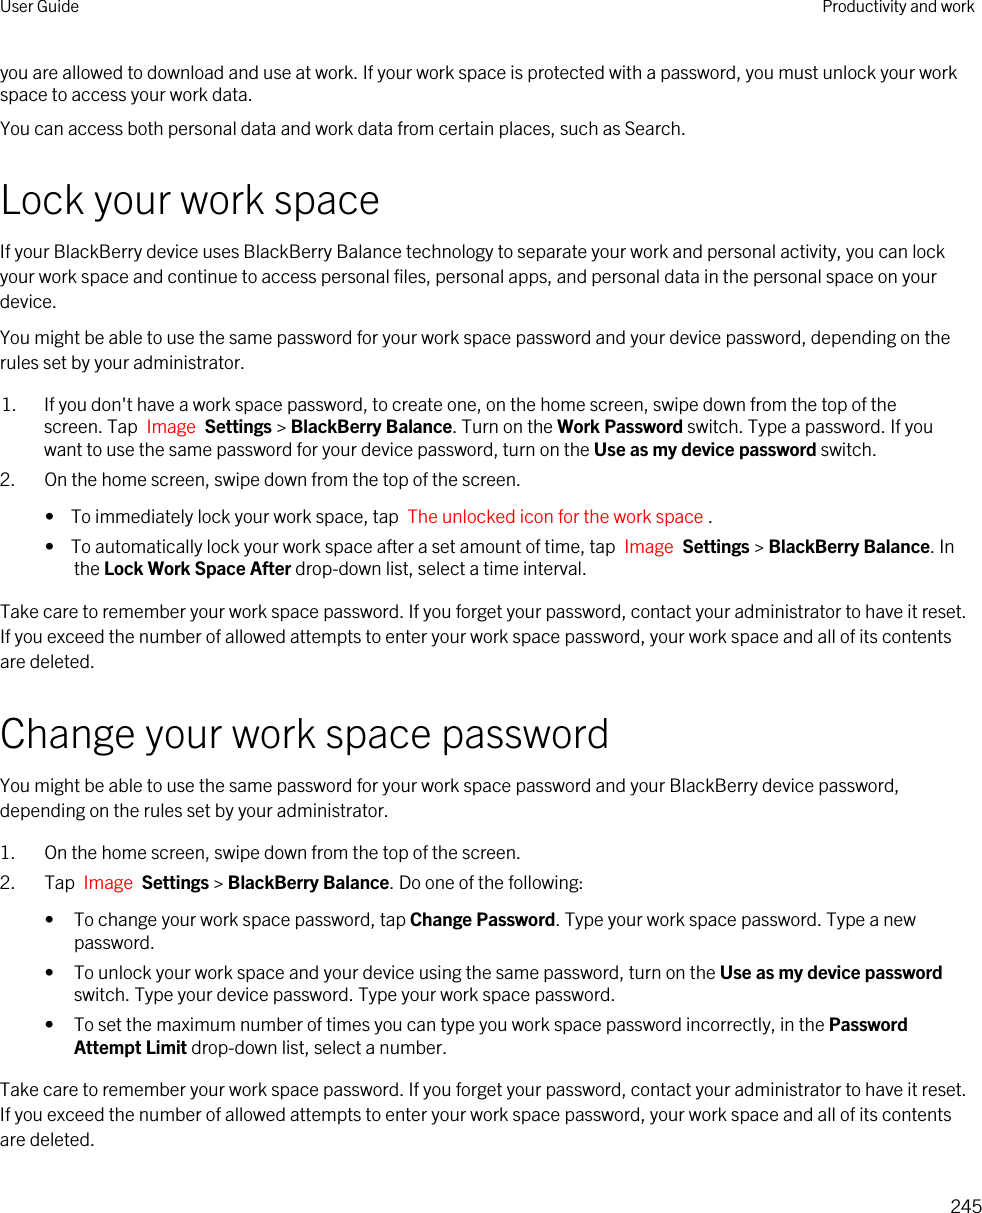 you are allowed to download and use at work. If your work space is protected with a password, you must unlock your work space to access your work data.You can access both personal data and work data from certain places, such as Search. Lock your work spaceIf your BlackBerry device uses BlackBerry Balance technology to separate your work and personal activity, you can lock your work space and continue to access personal files, personal apps, and personal data in the personal space on your device.You might be able to use the same password for your work space password and your device password, depending on the rules set by your administrator.1. If you don&apos;t have a work space password, to create one, on the home screen, swipe down from the top of the screen. Tap  Image  Settings &gt; BlackBerry Balance. Turn on the Work Password switch. Type a password. If you want to use the same password for your device password, turn on the Use as my device password switch.2. On the home screen, swipe down from the top of the screen.•  To immediately lock your work space, tap  The unlocked icon for the work space .•  To automatically lock your work space after a set amount of time, tap  Image  Settings &gt; BlackBerry Balance. In the Lock Work Space After drop-down list, select a time interval.Take care to remember your work space password. If you forget your password, contact your administrator to have it reset. If you exceed the number of allowed attempts to enter your work space password, your work space and all of its contents are deleted.Change your work space passwordYou might be able to use the same password for your work space password and your BlackBerry device password, depending on the rules set by your administrator.1. On the home screen, swipe down from the top of the screen.2. Tap  Image  Settings &gt; BlackBerry Balance. Do one of the following:• To change your work space password, tap Change Password. Type your work space password. Type a new password.• To unlock your work space and your device using the same password, turn on the Use as my device password switch. Type your device password. Type your work space password.• To set the maximum number of times you can type you work space password incorrectly, in the Password Attempt Limit drop-down list, select a number.Take care to remember your work space password. If you forget your password, contact your administrator to have it reset. If you exceed the number of allowed attempts to enter your work space password, your work space and all of its contents are deleted.User Guide Productivity and work245